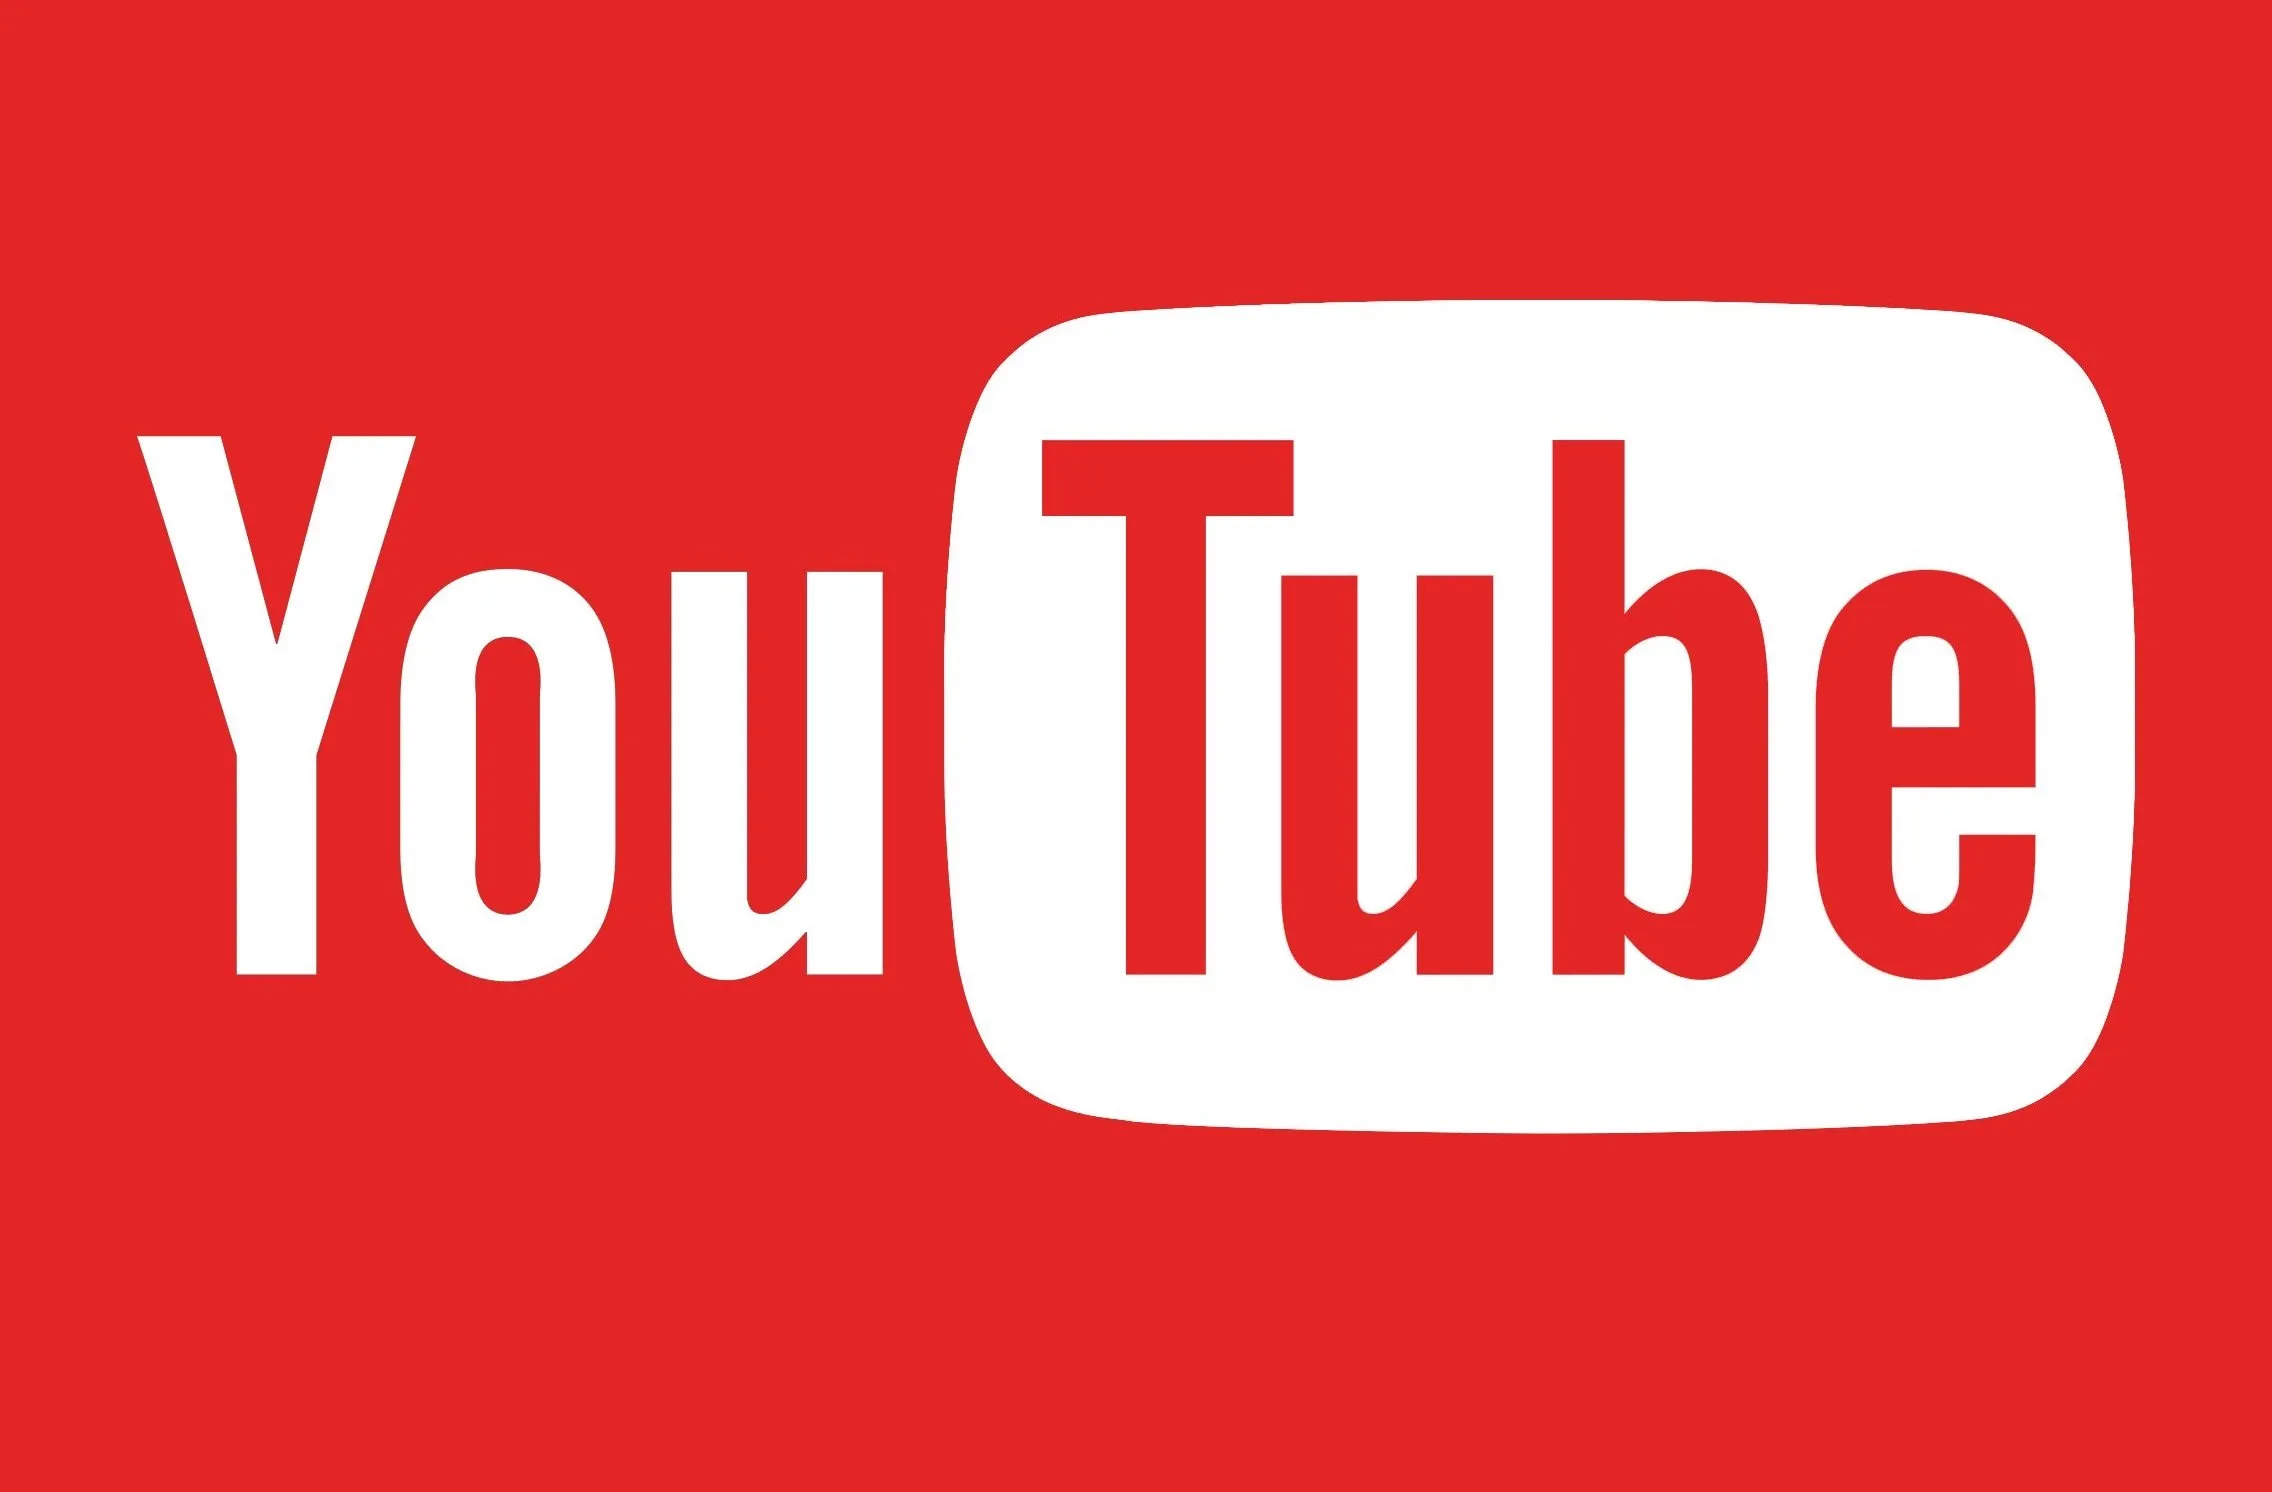 Buy YouTube Views Non Drop – What You Need to Know